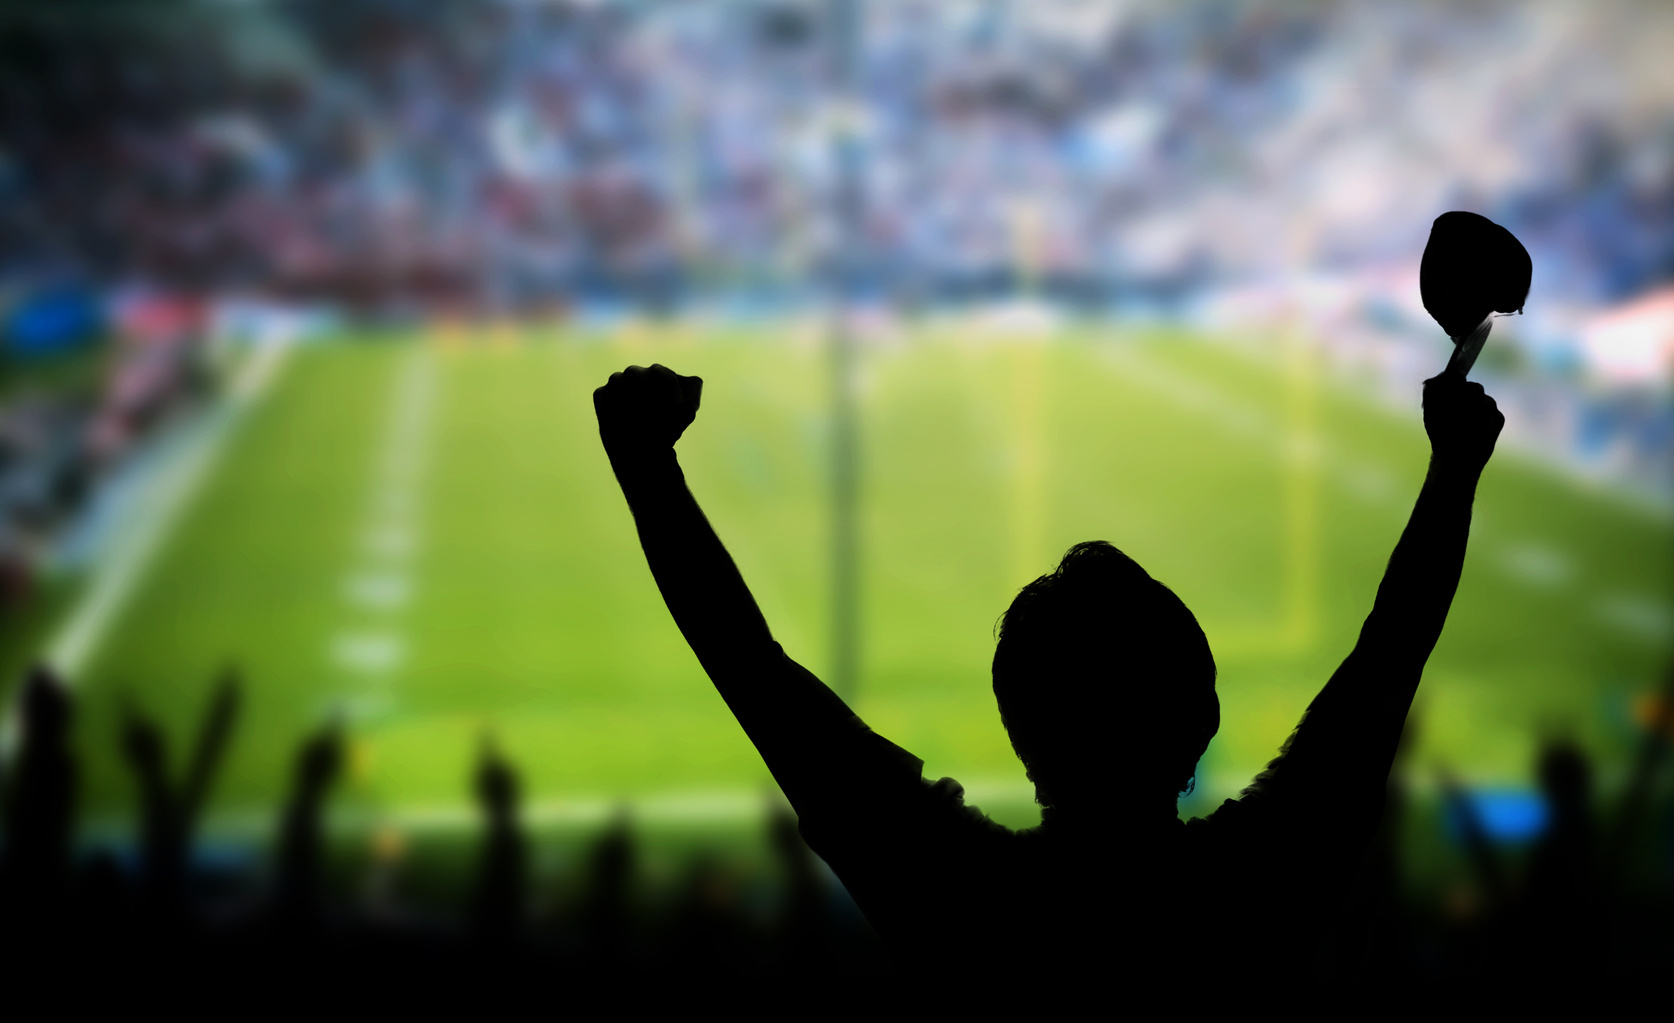 Man Raising Arms in Excitement at Sporting Event